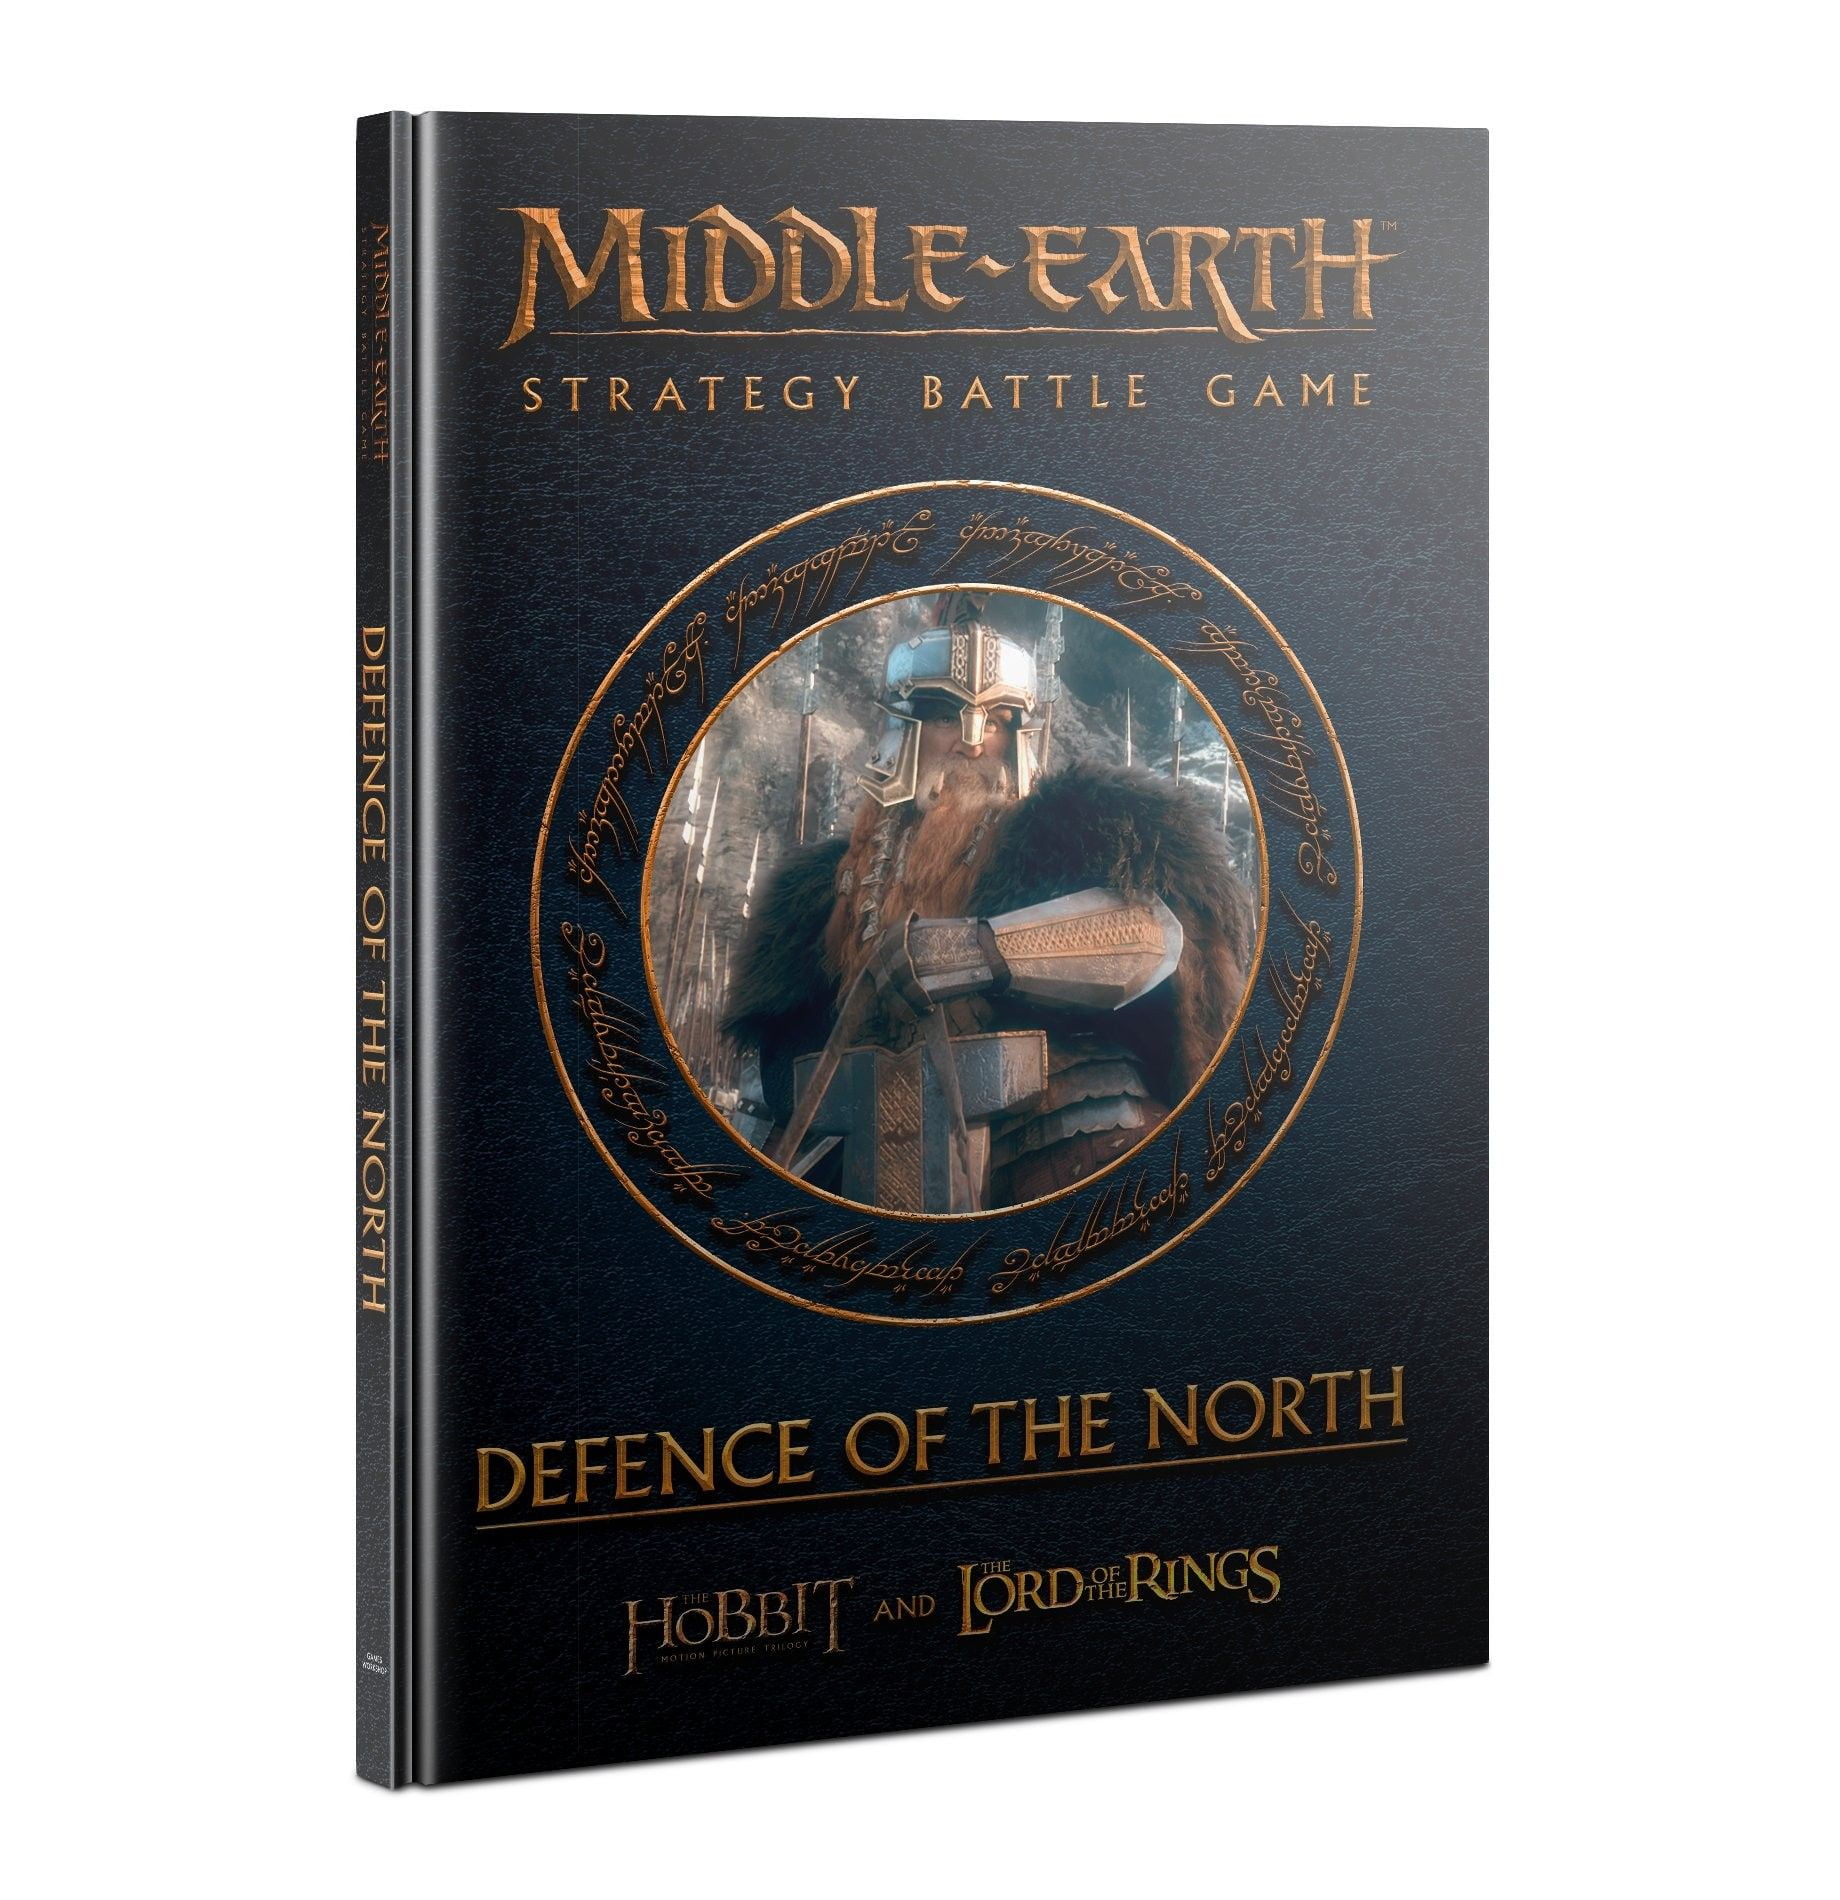 Middle-earth Strategy Battle Game: Defence of the North - English